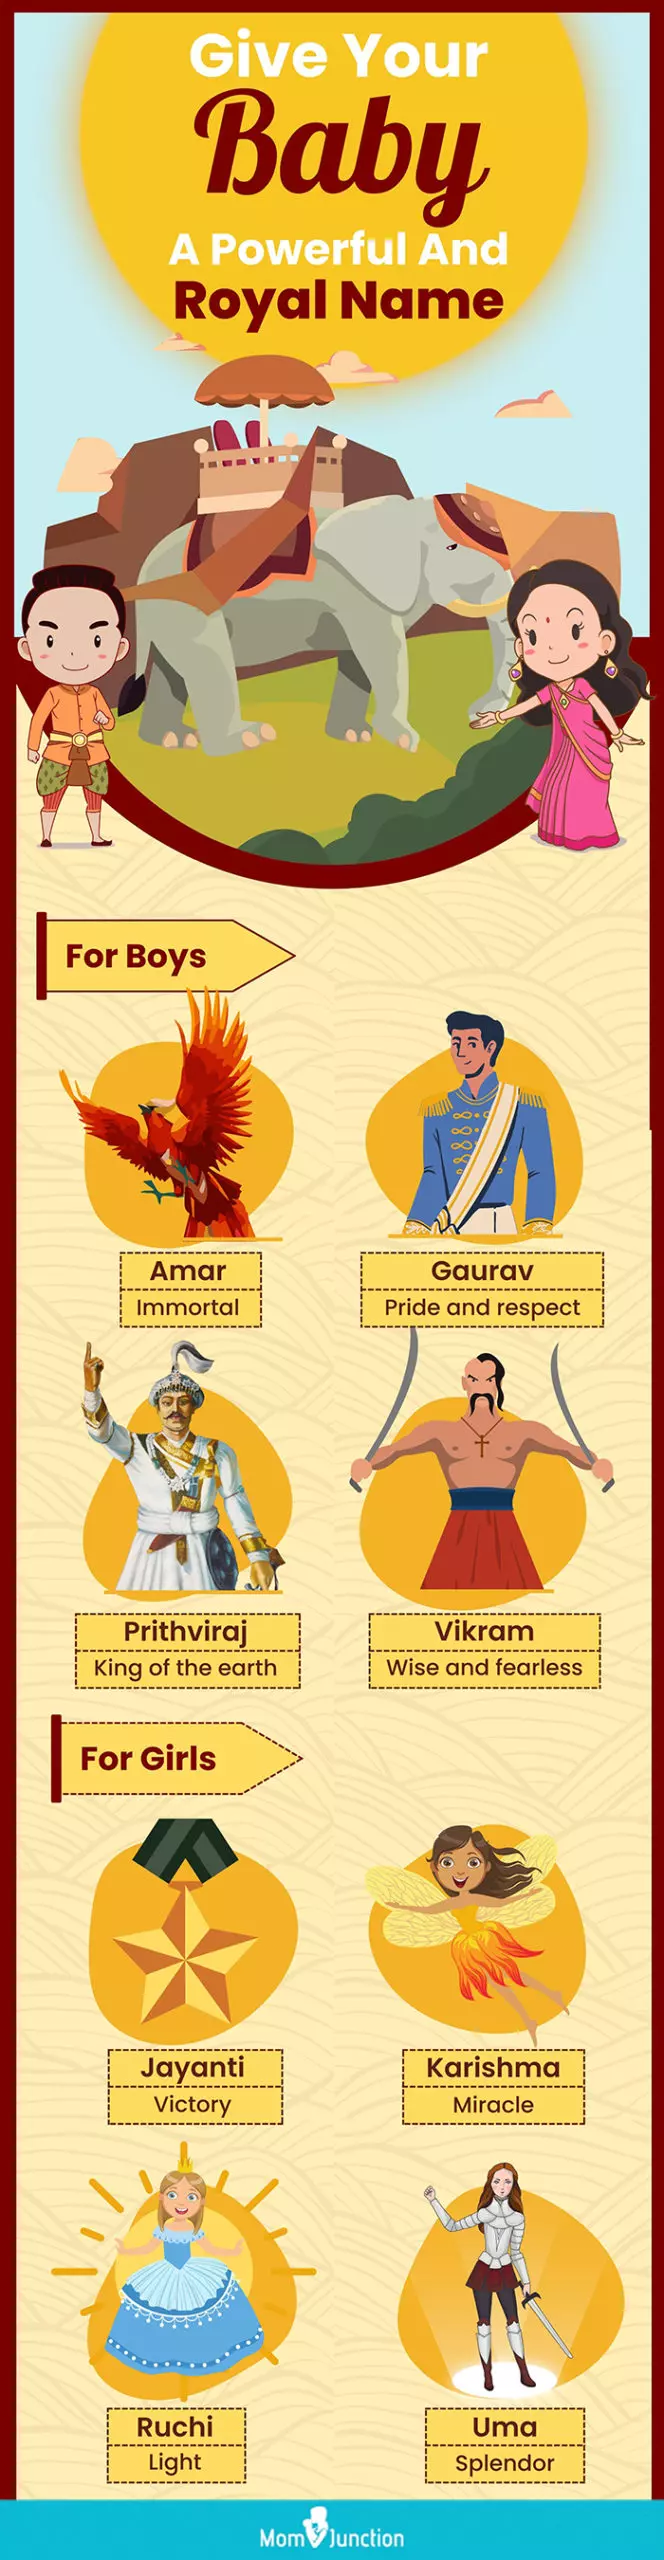 give your baby a powerful and royal name (infographic)